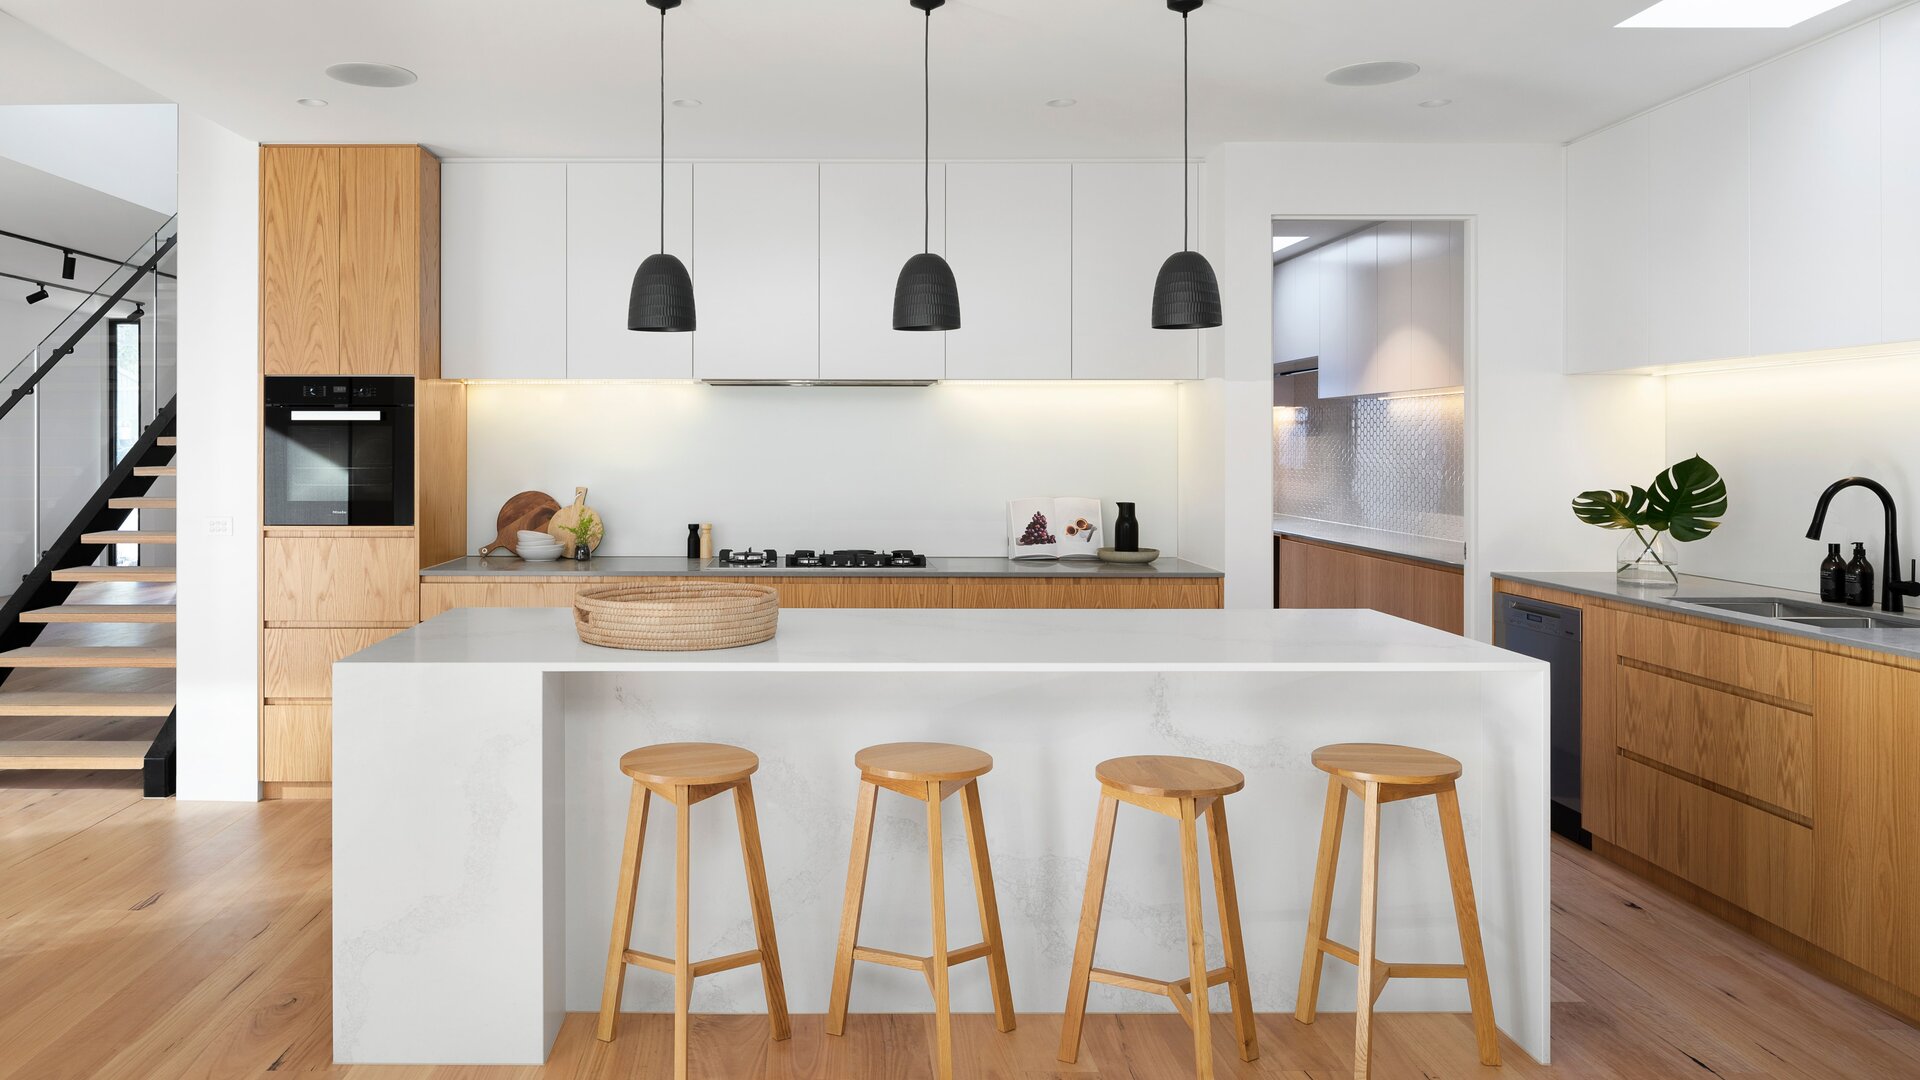 Modern white kitchen with wooden elements, white kitchen island and wooden stool.